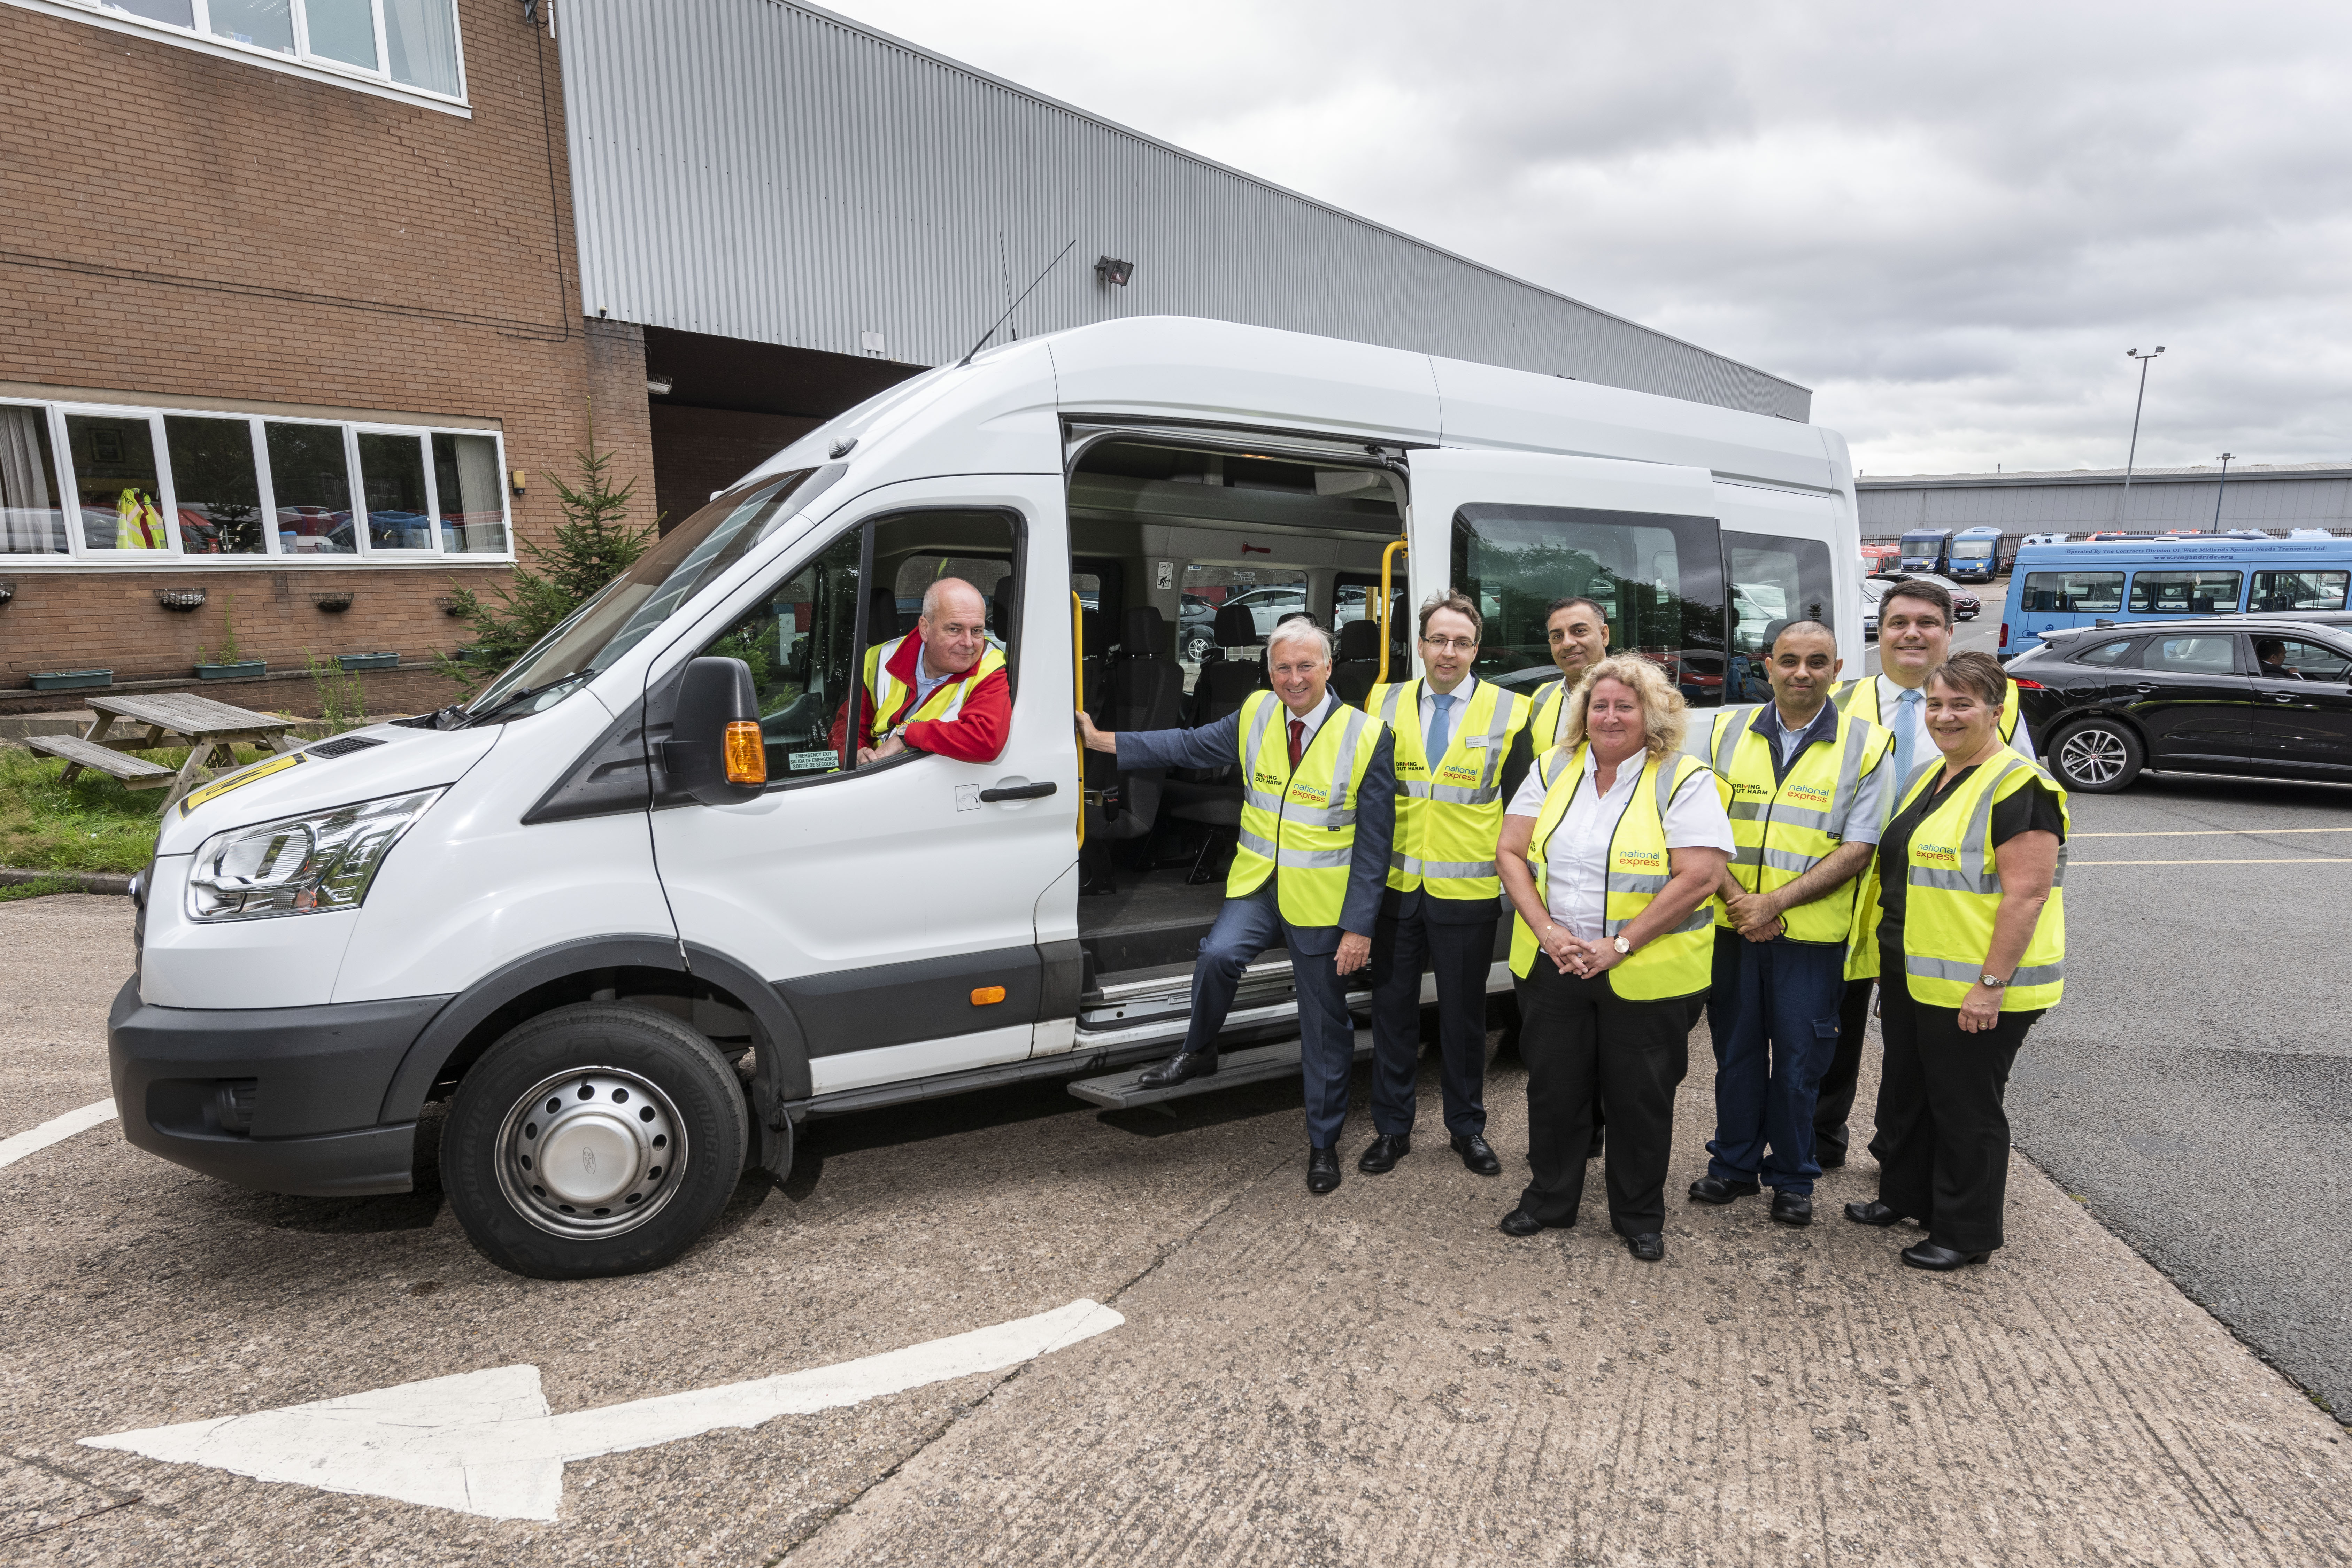 Cllr Ian Ward, WMCA portfolio lead for transport, is pictured second from the left, meeting National Express West Midlands managing director David Bradford (third from the left) and members of the National Express Accessible Transport team